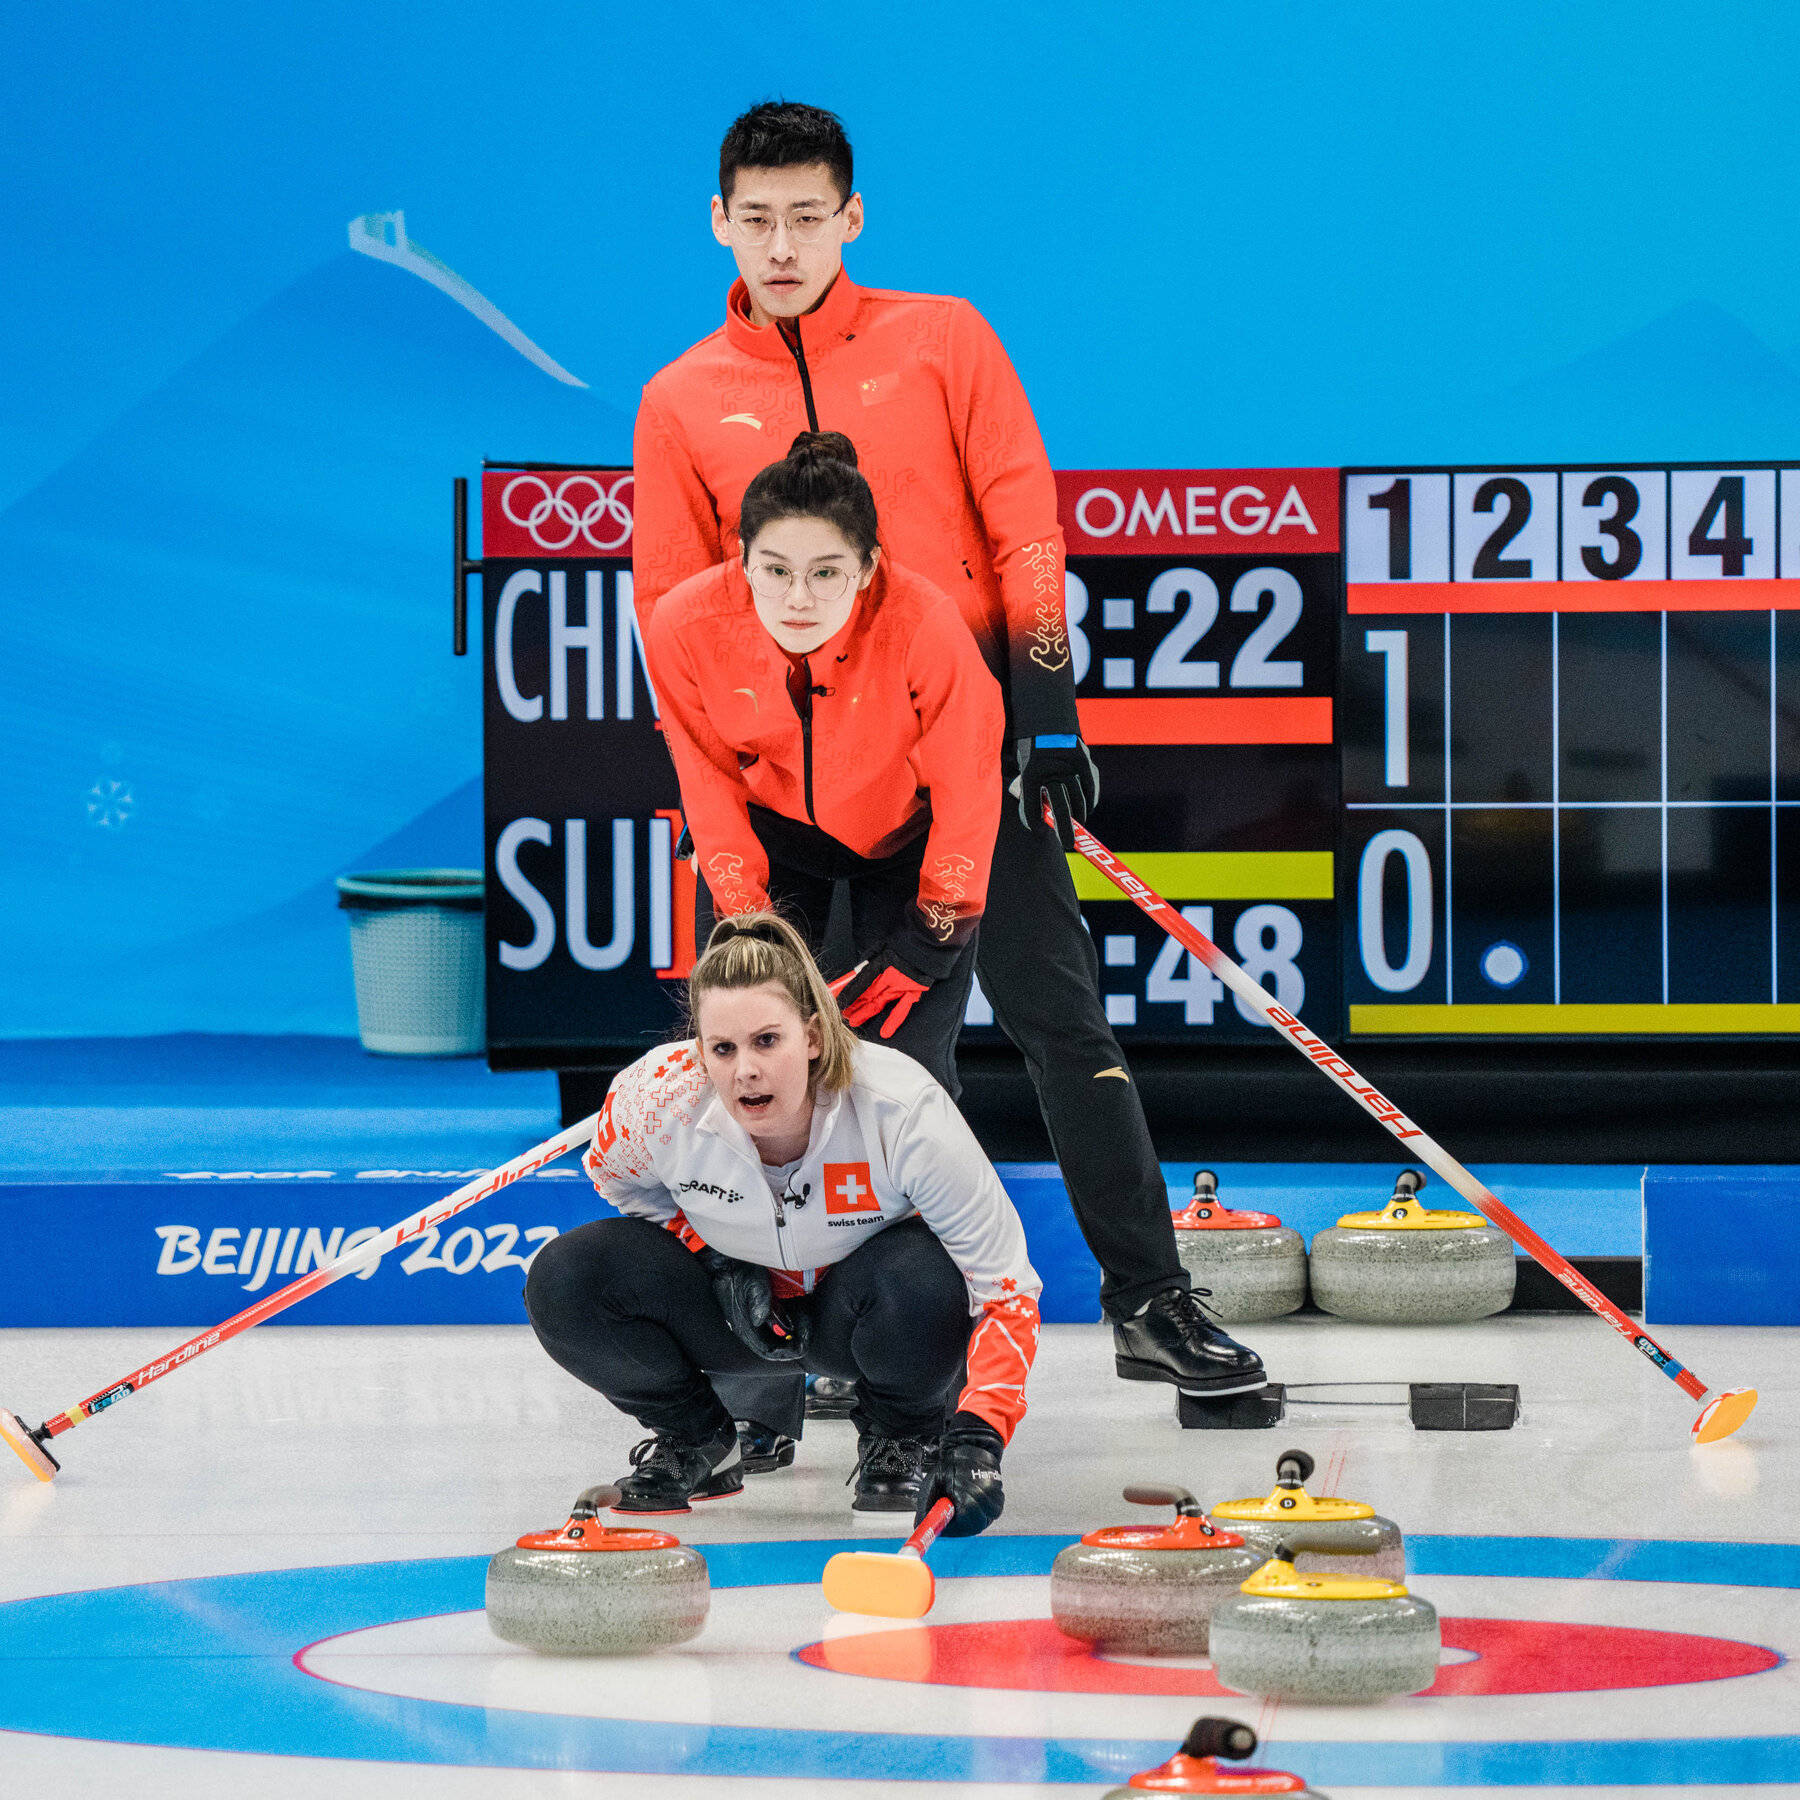 Mixed Doubles Curling Competition Wallpaper